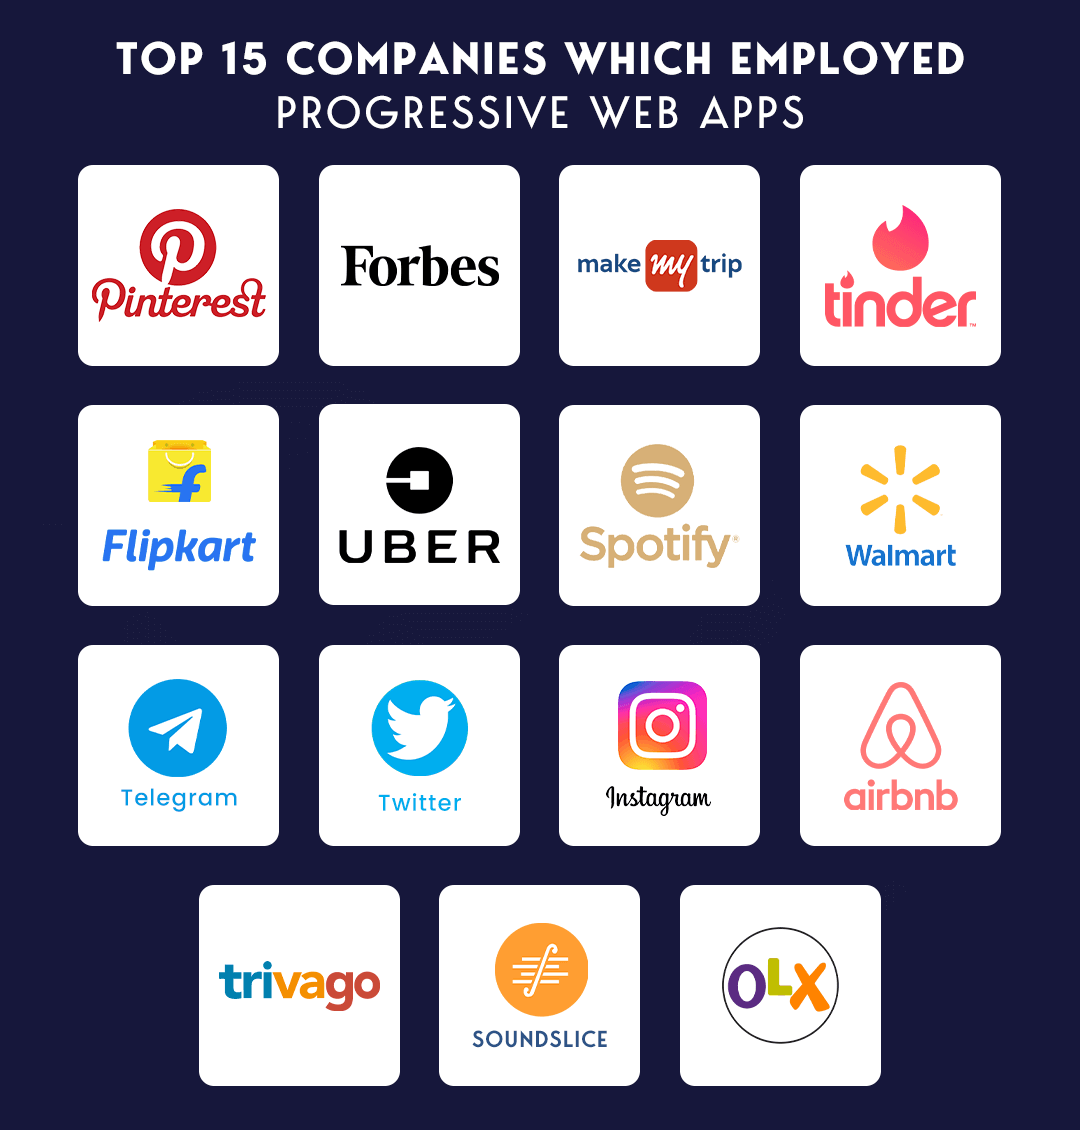 Top 15 Companies which employed Progressive Web Apps